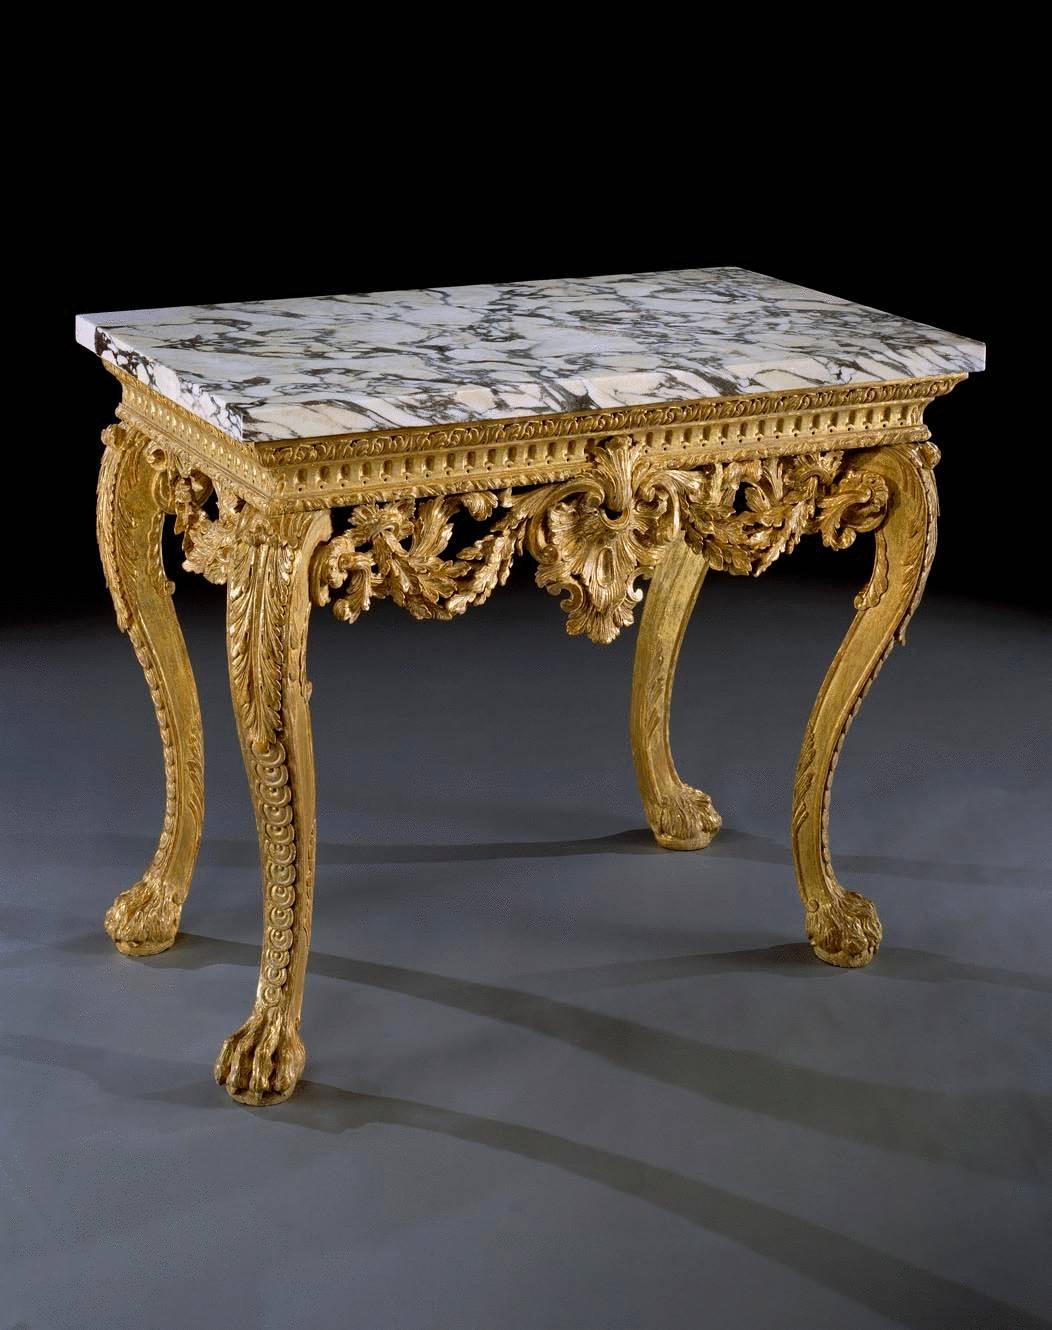 A rare and important pair of early 18th century carved giltwood side tables in the manner of William Kent. The rectangular replaced ‘brèche de Medici’ marble tops on moulded apron with stiff leaf carving centred by a finely carved Venus shell